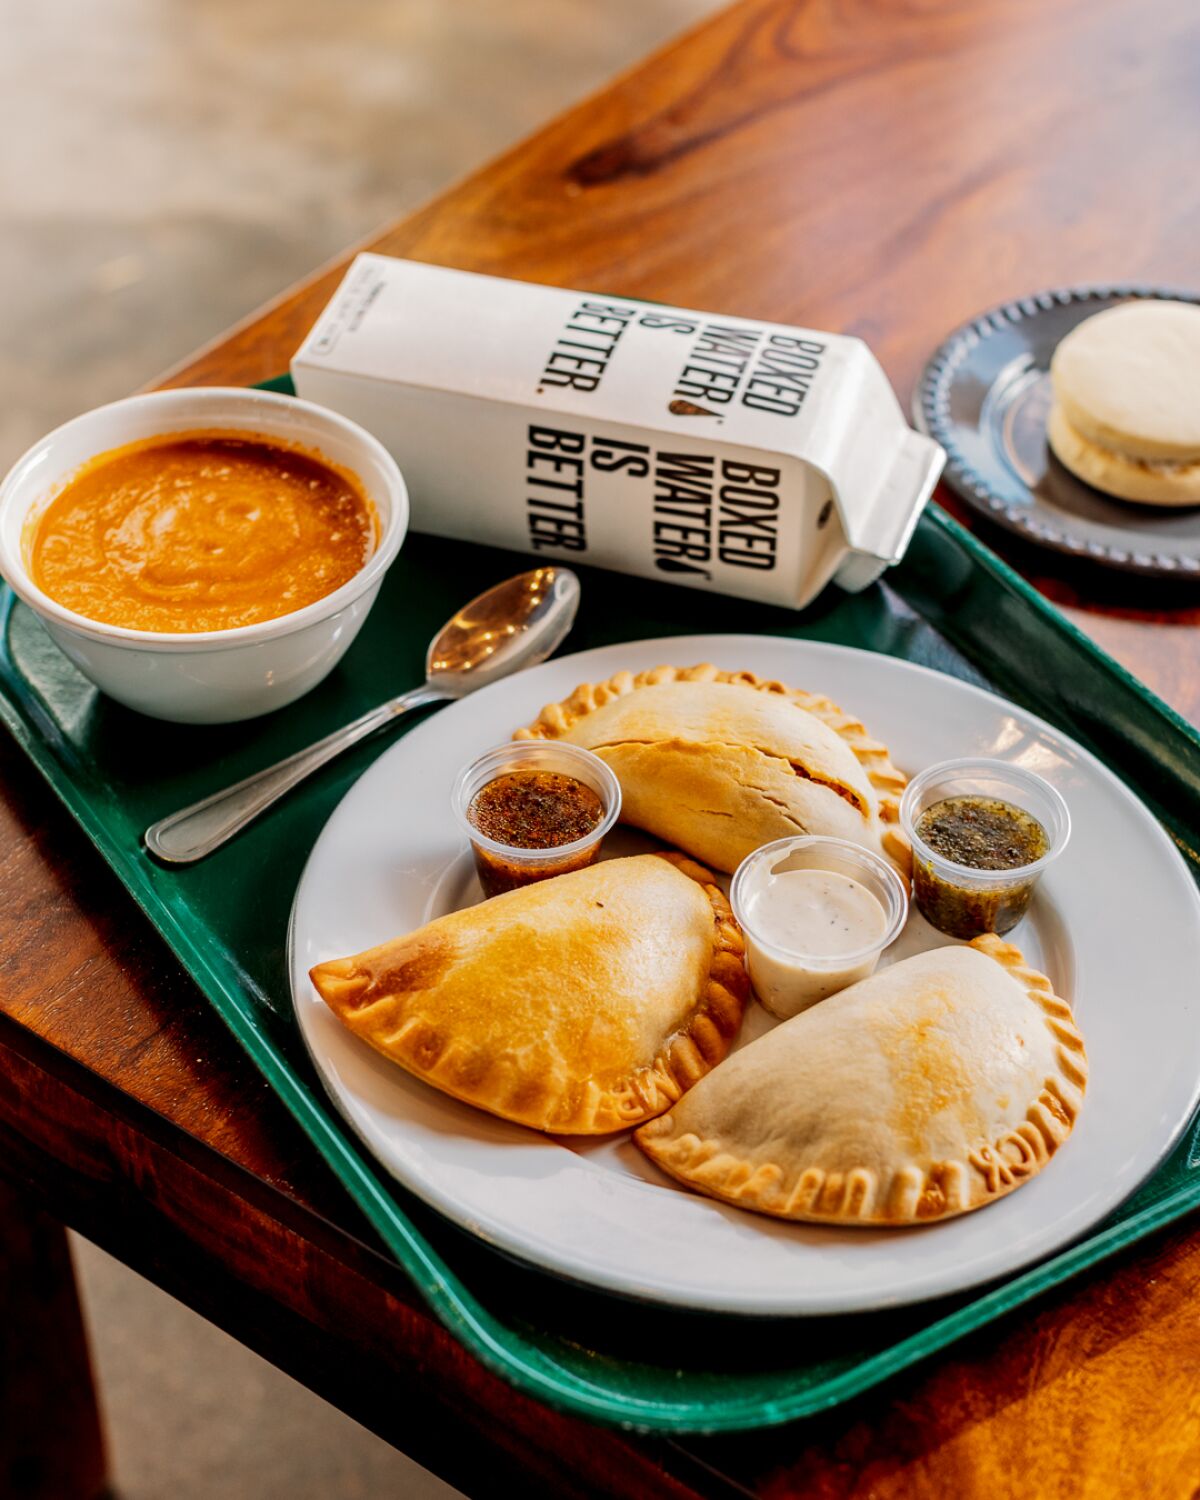 The lunch combo includes three empanadas, a drink and side of soup or salad